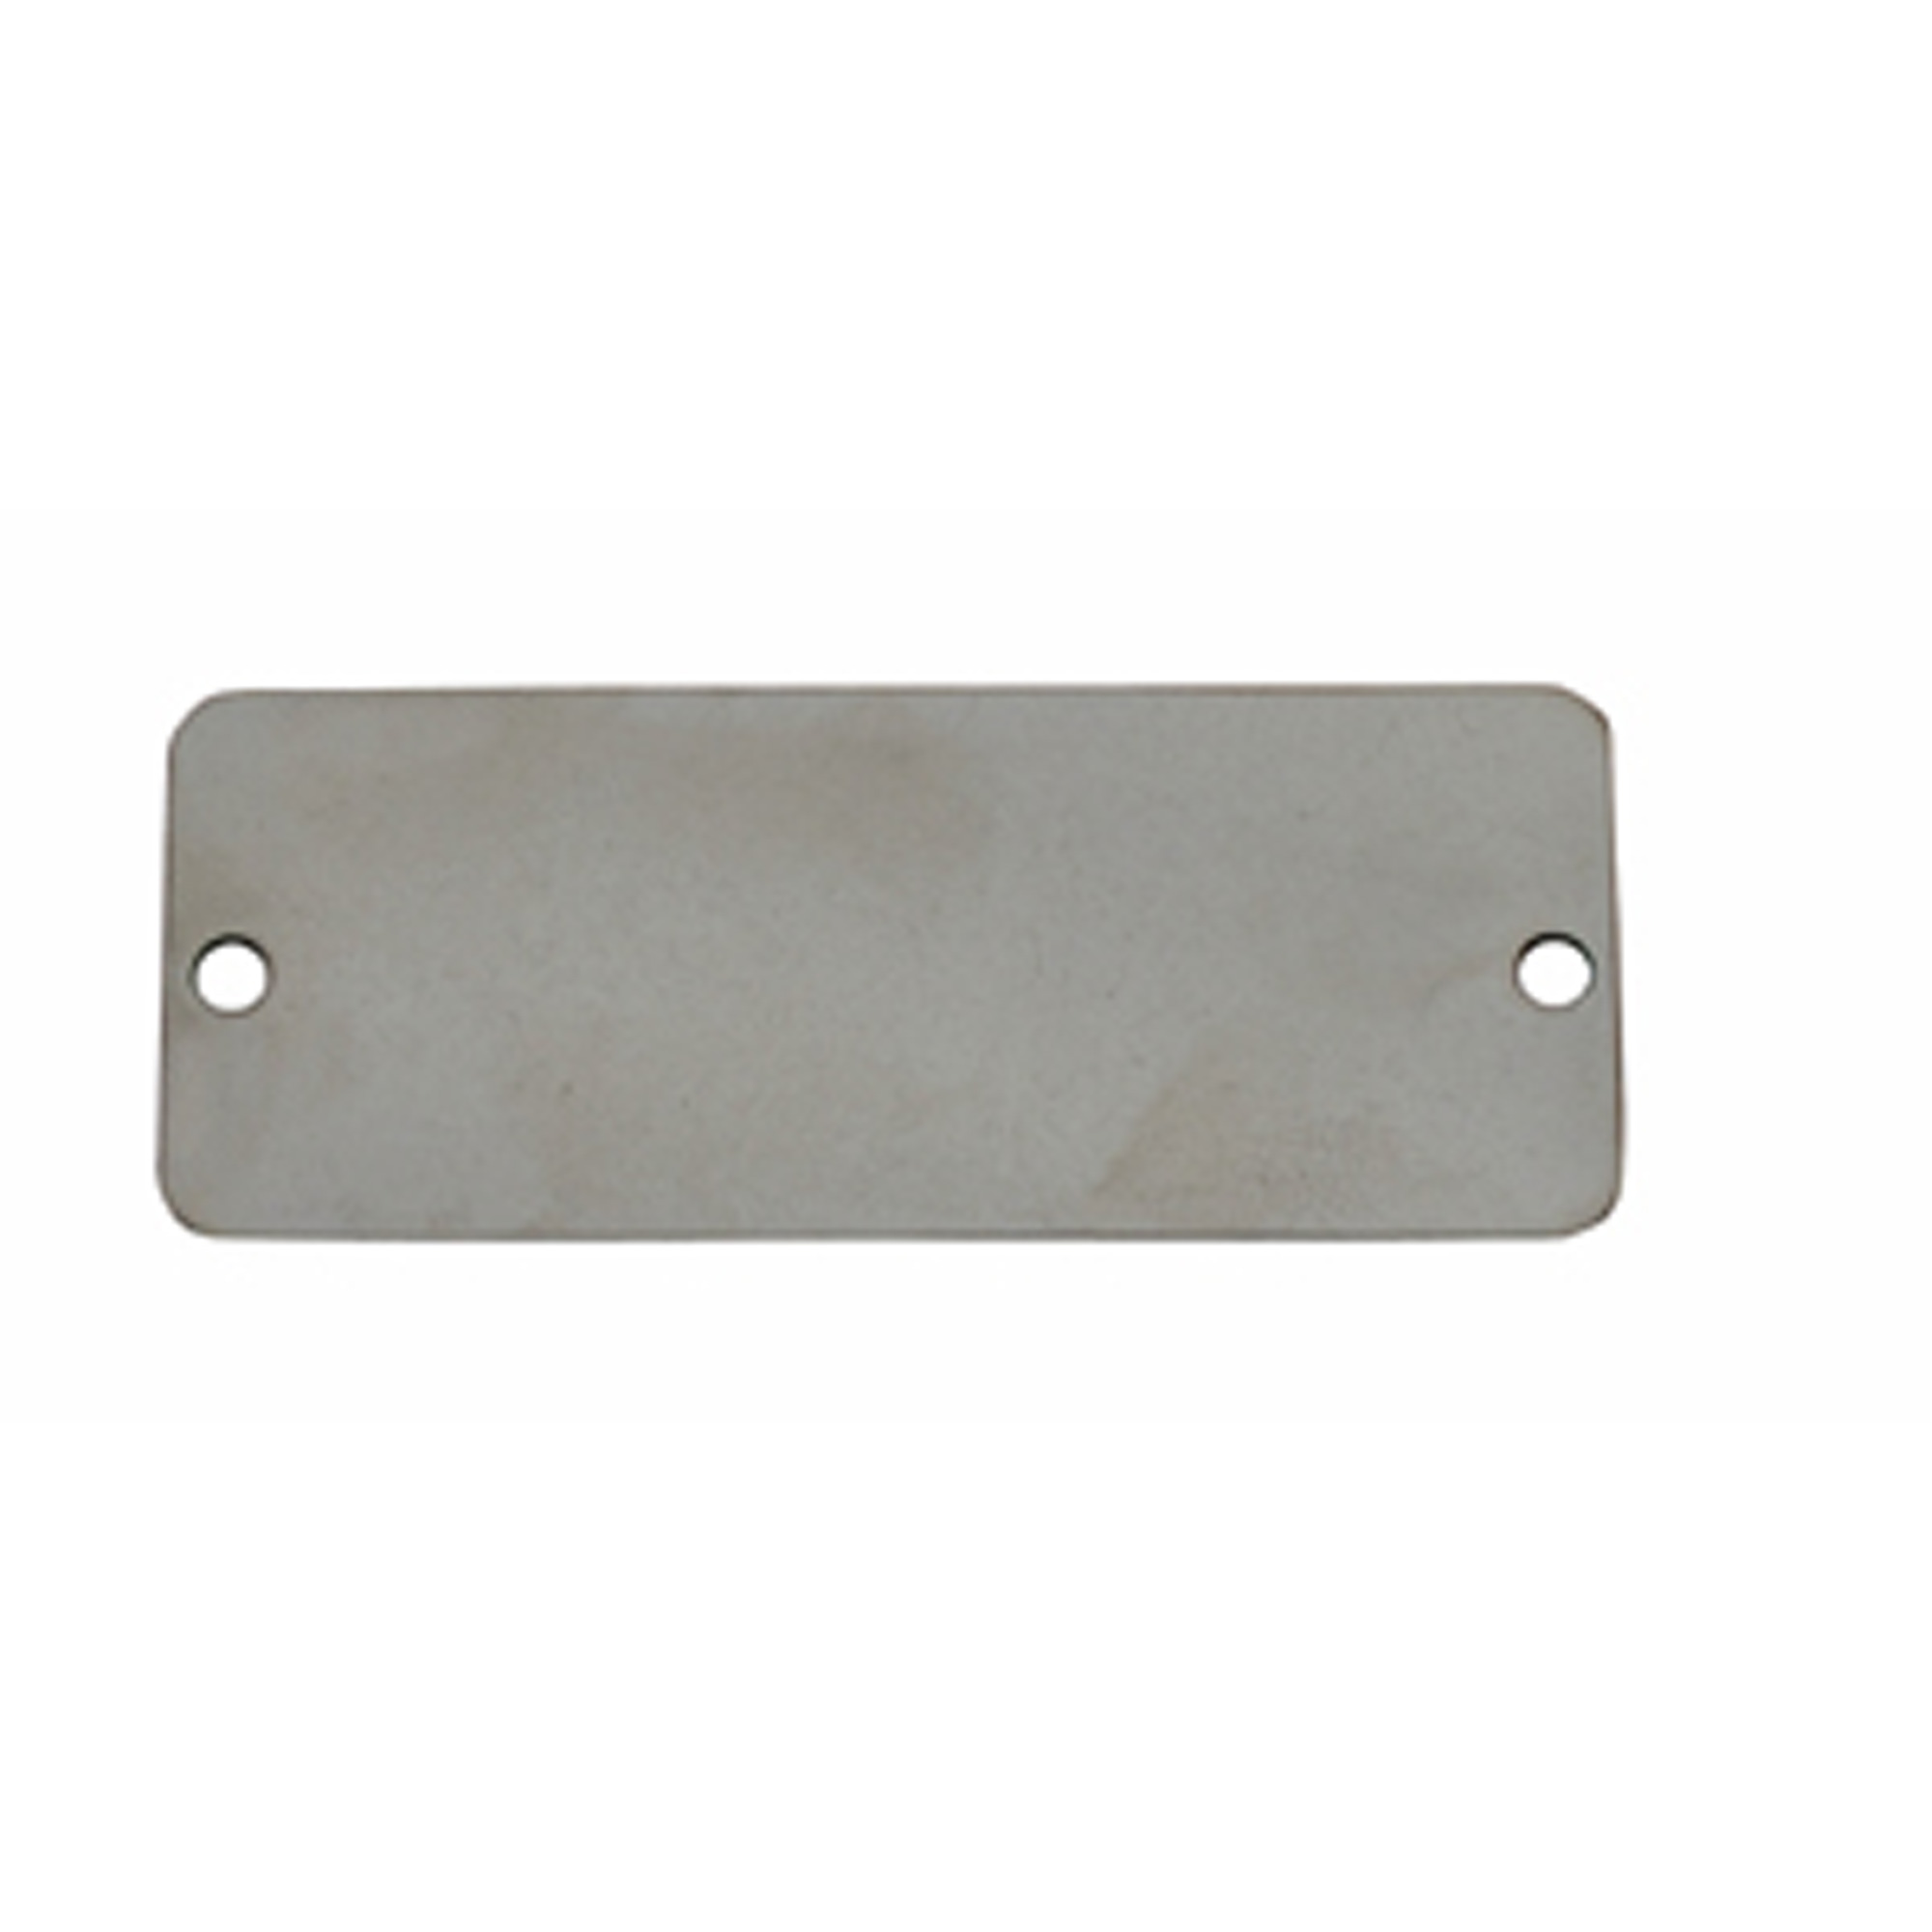 Cox Hardware and Lumber - Blank Rectangular Brass Tag (Sizes)